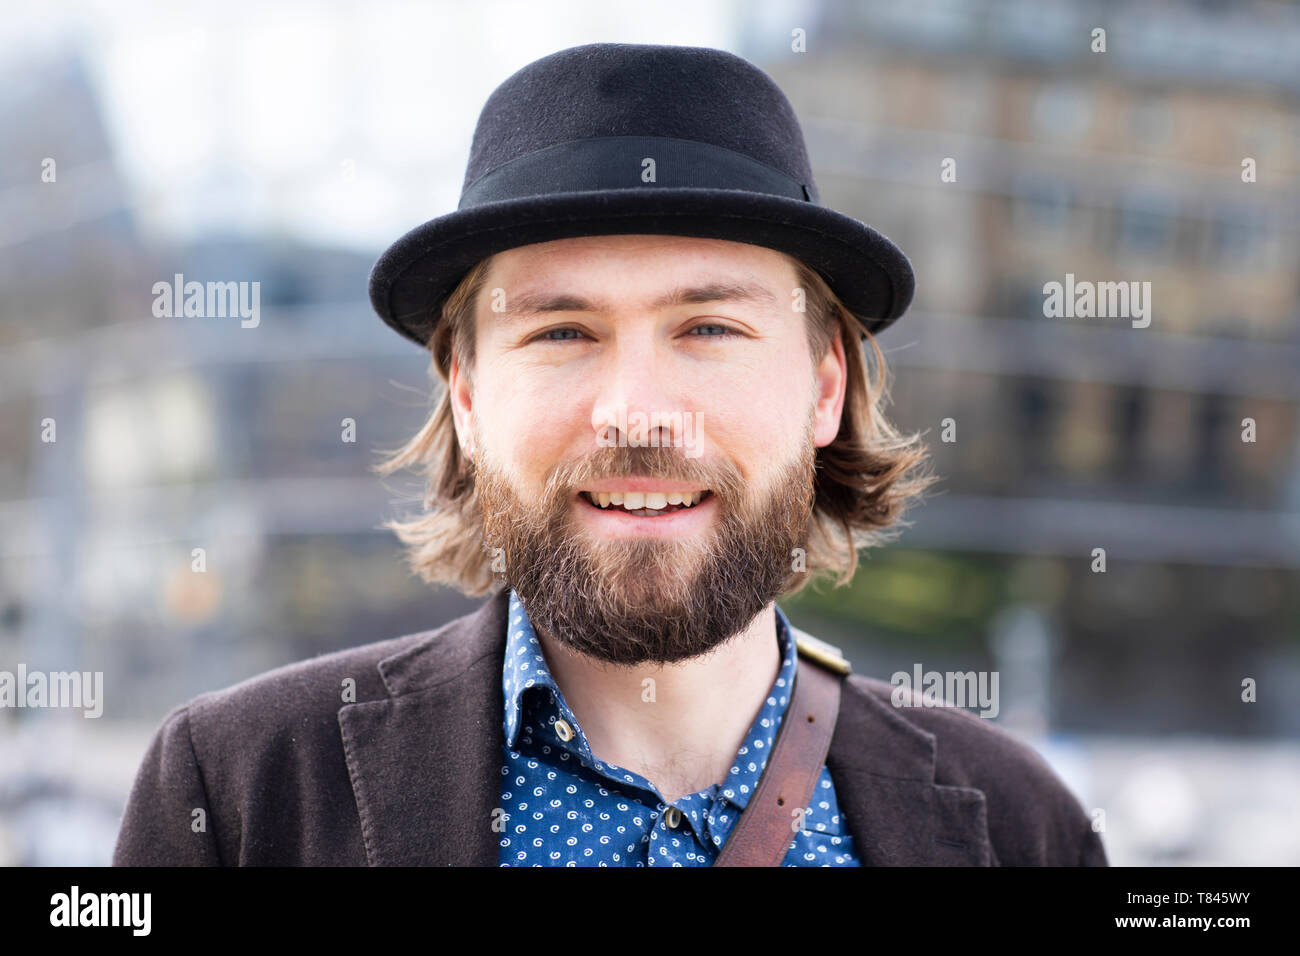 Man in trilby on city street, close up portrait Stock Photo